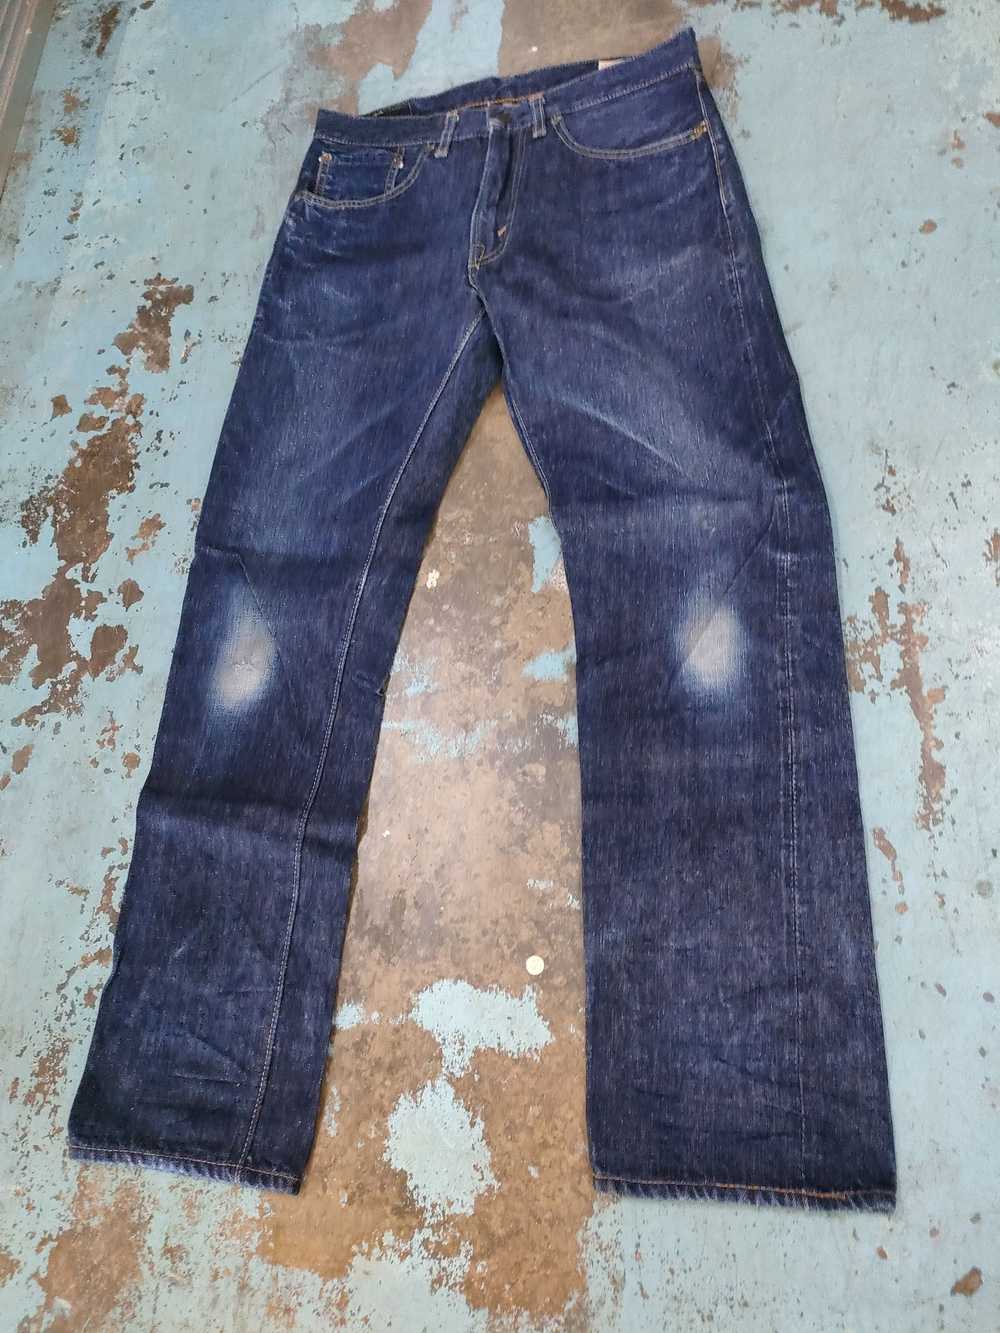 Japanese Brand Or Slow Japan Selvedge Jeans - image 8